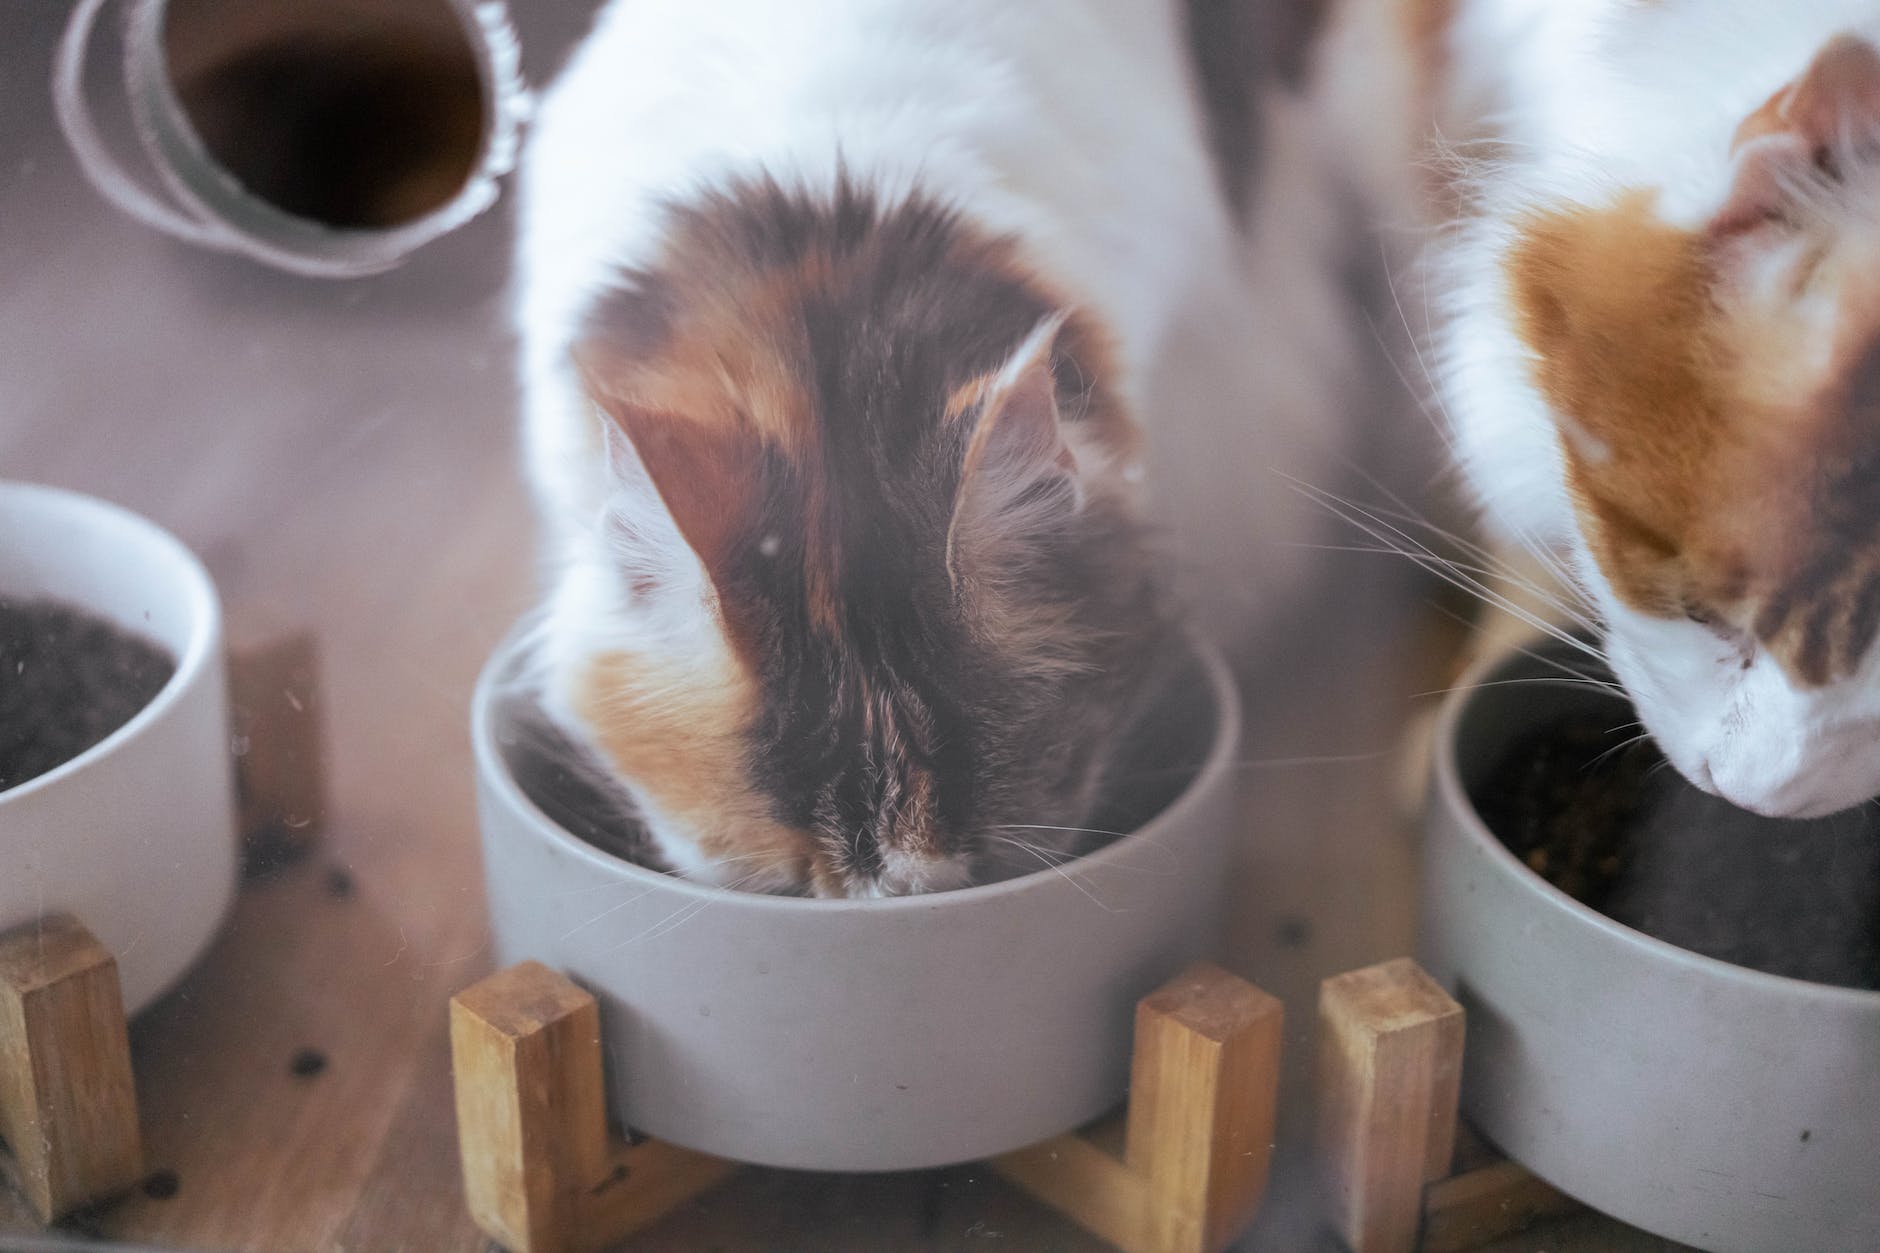 What soft foods can cats eat?